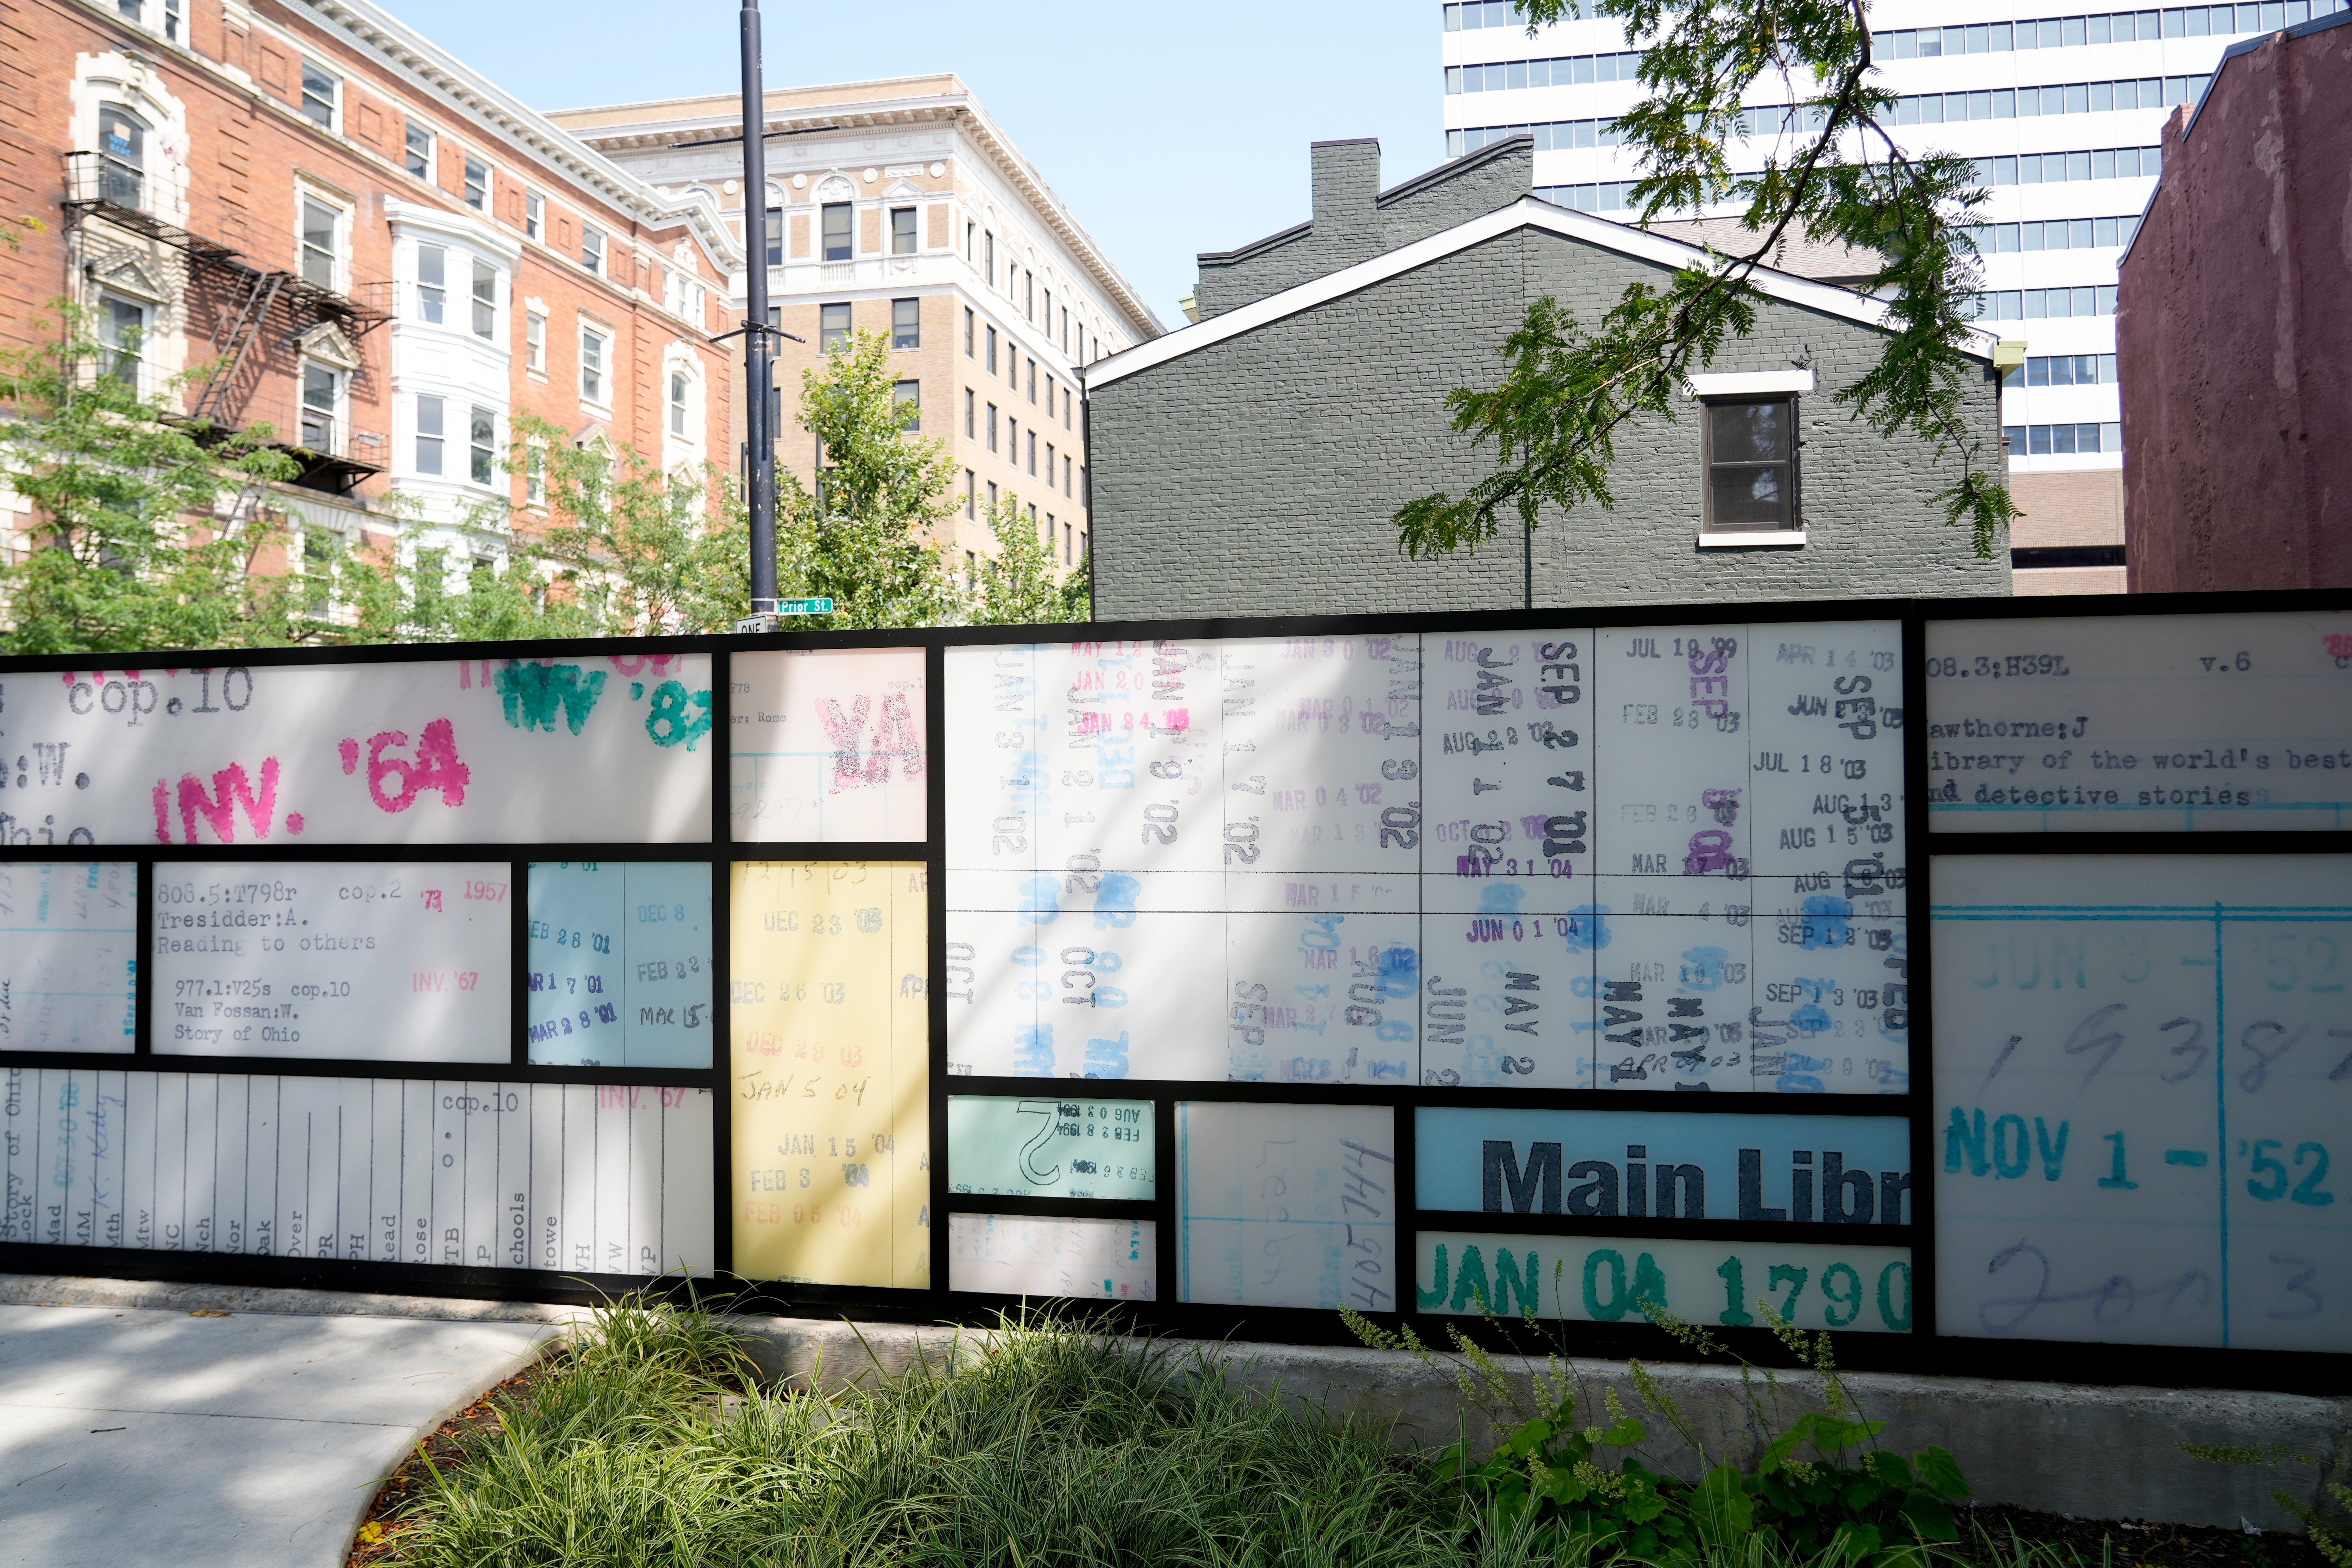 Cincinnati Public Library's new art wall has 17 memorable dates in it. See what they are